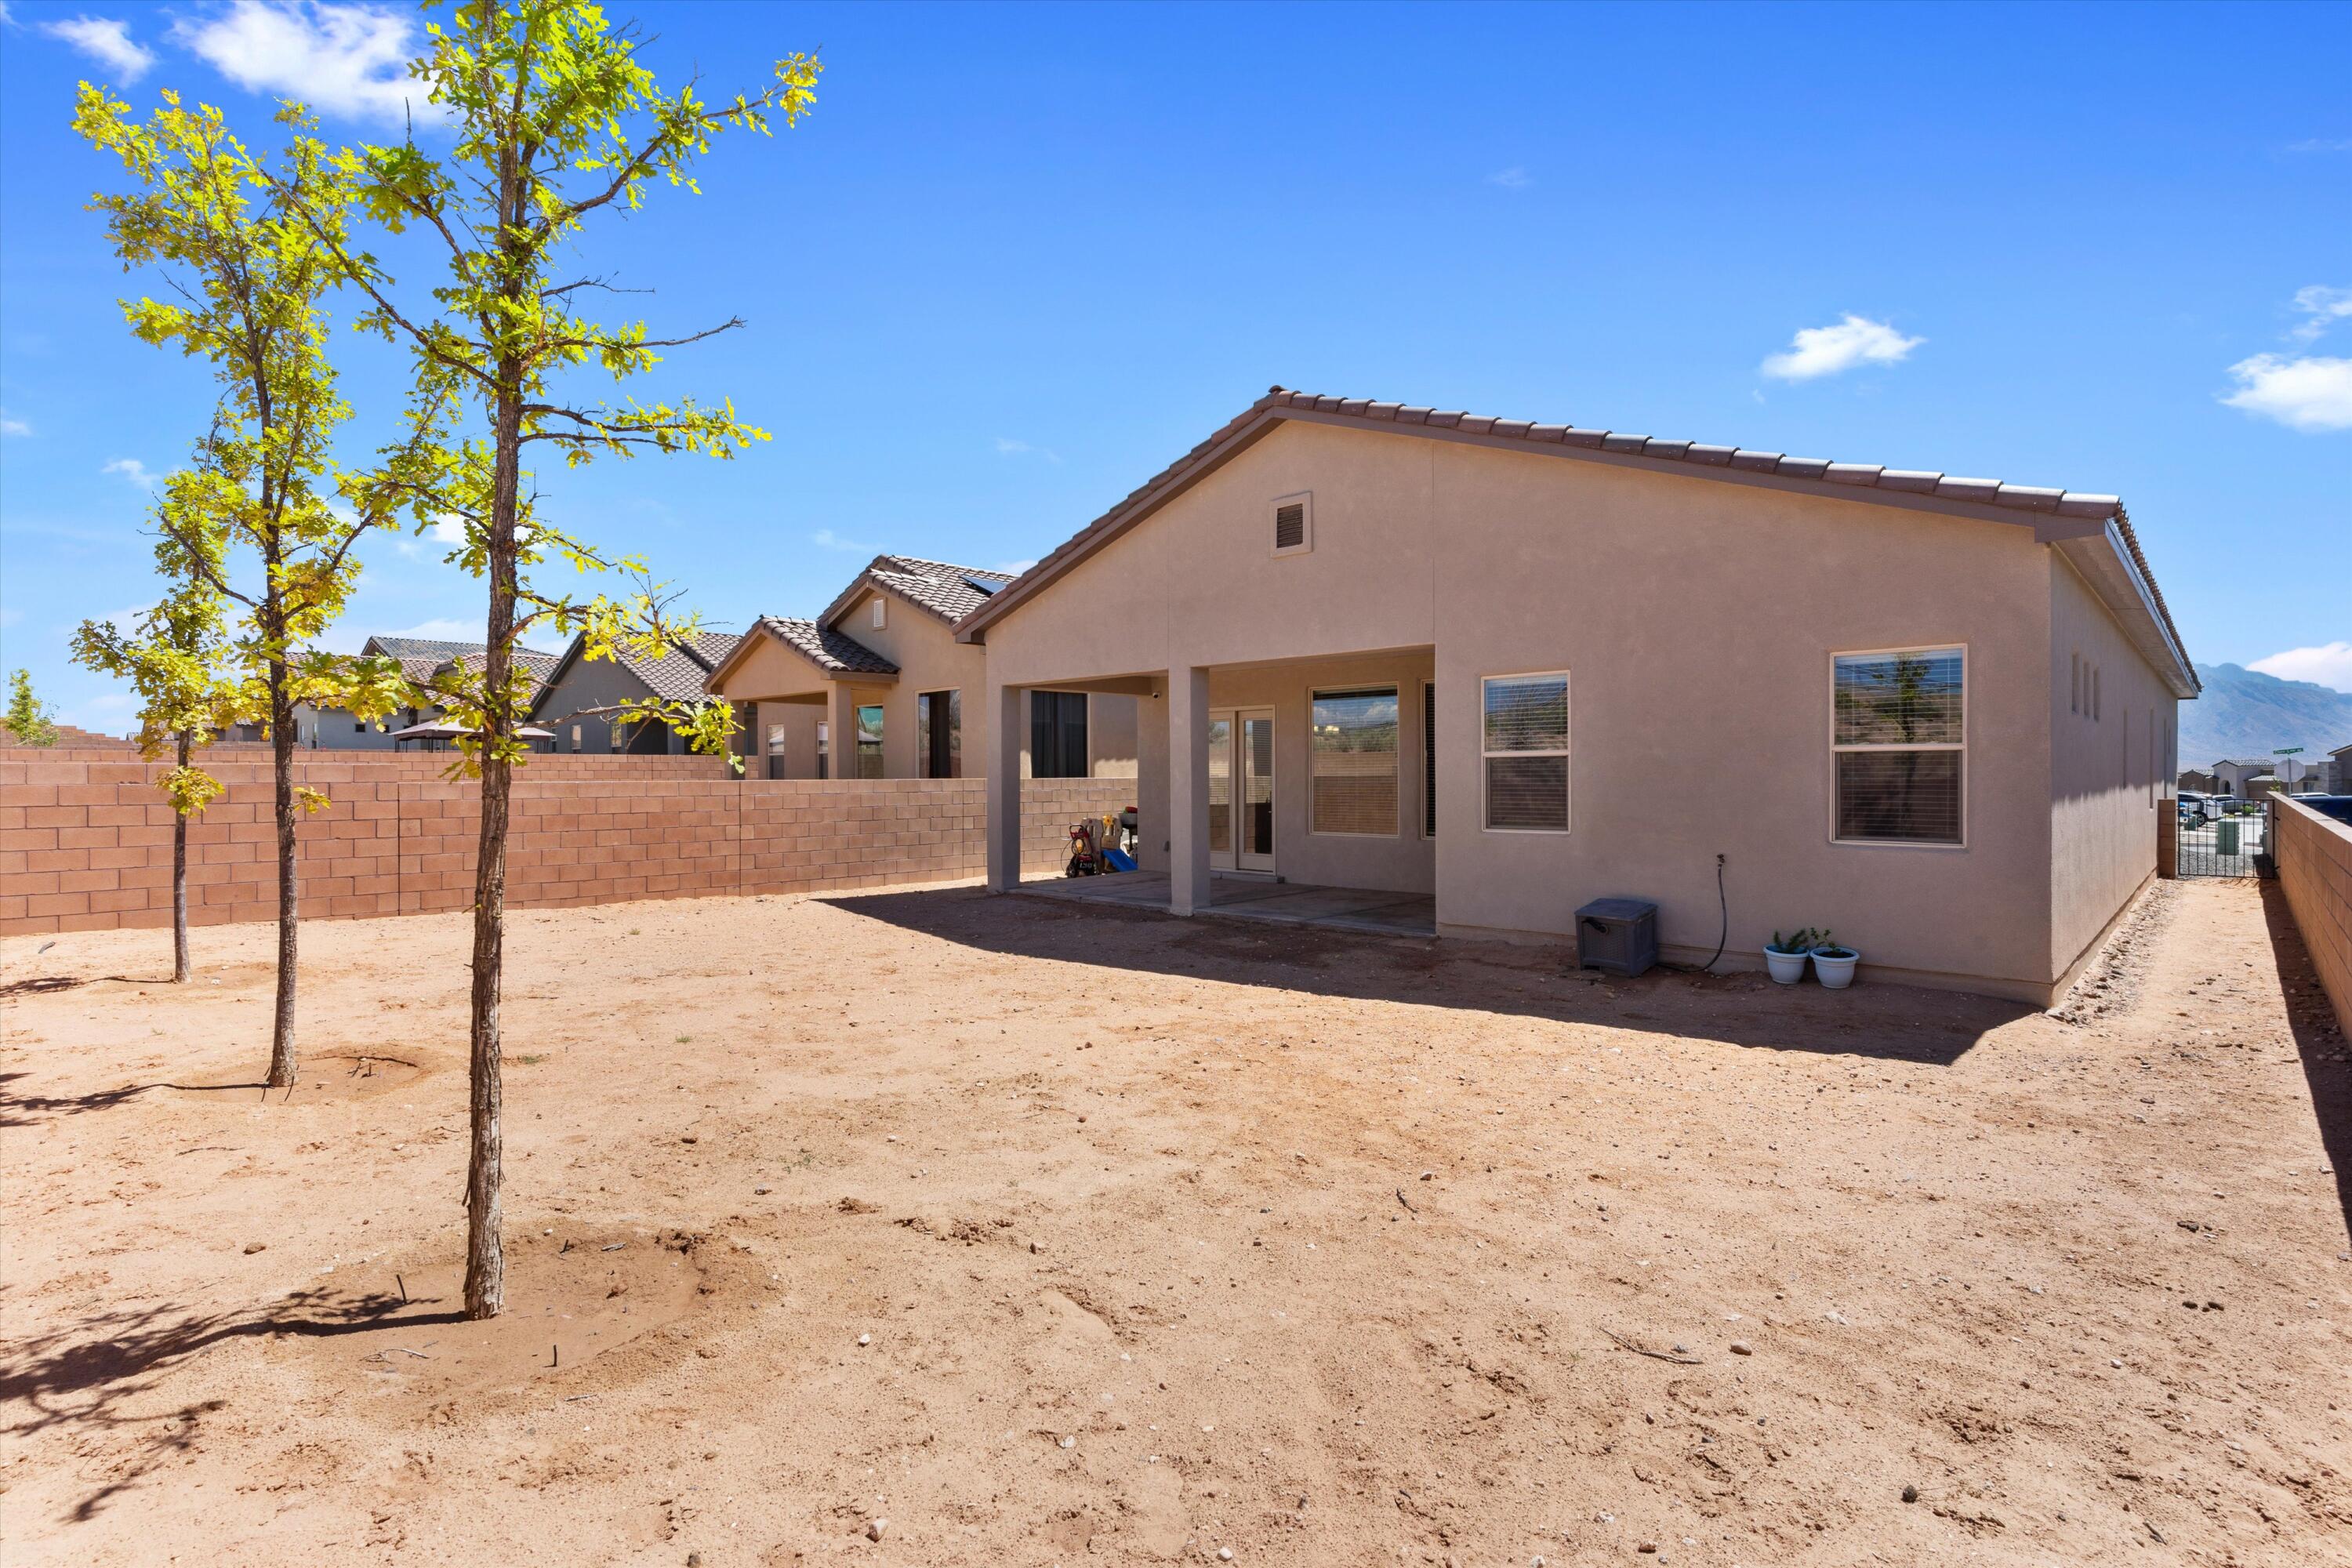 6841 Cleary Loop NE, Rio Rancho, New Mexico 87144, 3 Bedrooms Bedrooms, ,3 BathroomsBathrooms,Residential,For Sale,6841 Cleary Loop NE,1054790